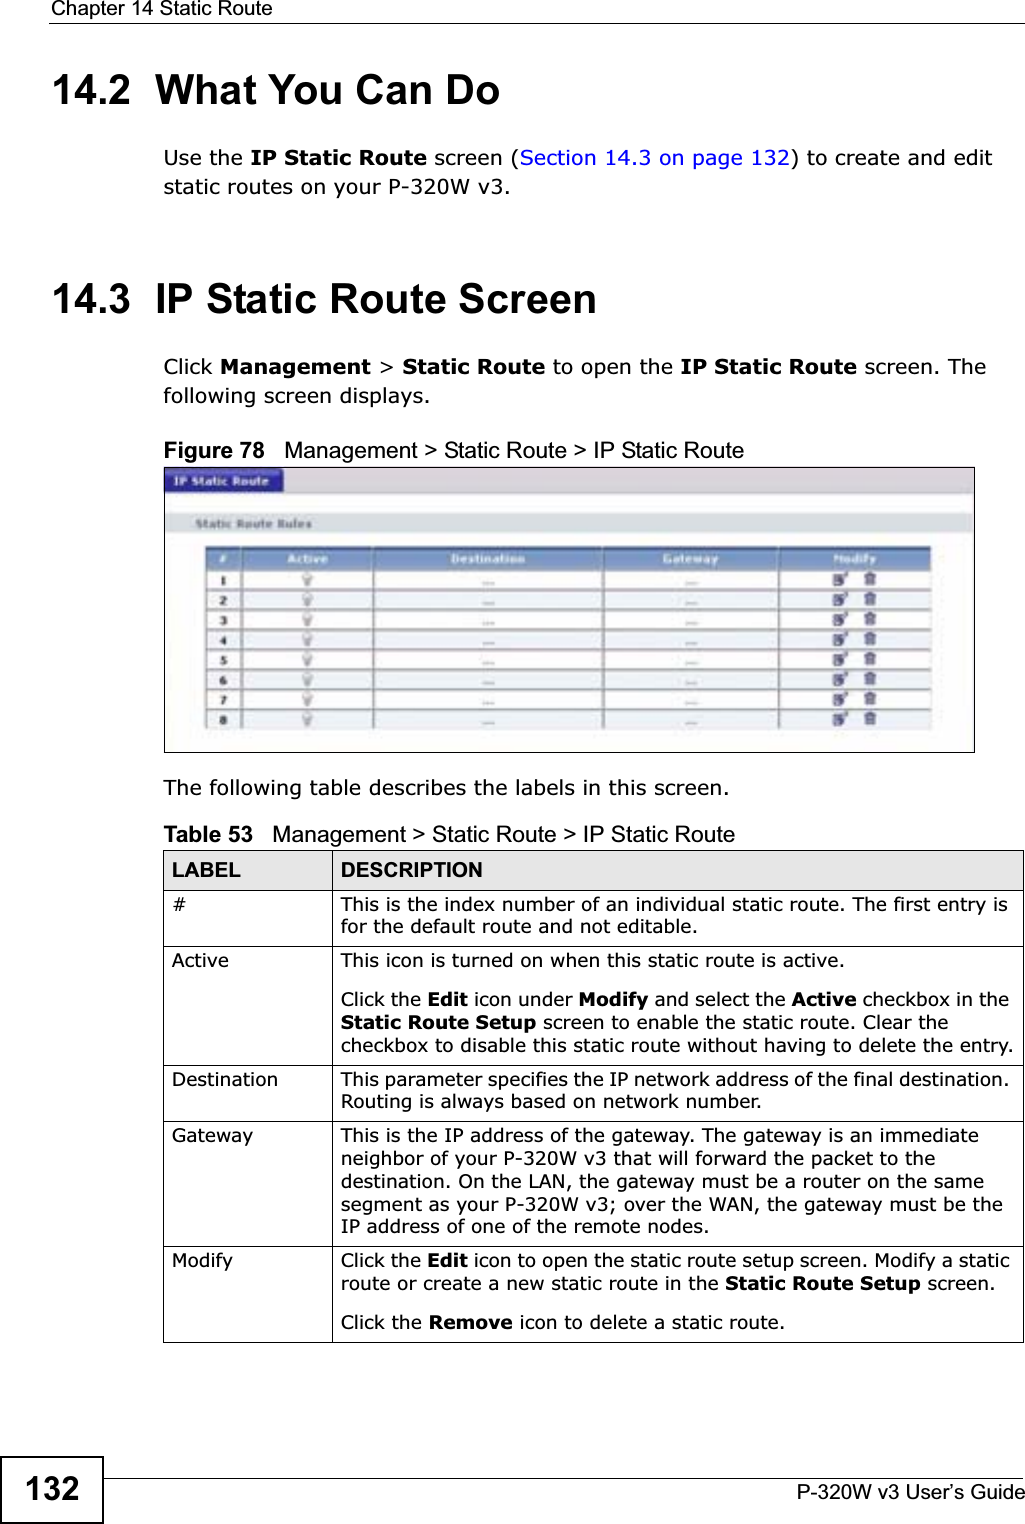 Chapter 14 Static RouteP-320W v3 User’s Guide13214.2  What You Can DoUse the IP Static Route screen (Section 14.3 on page 132) to create and edit static routes on your P-320W v3.14.3  IP Static Route ScreenClick Management &gt; Static Route to open the IP Static Route screen. The following screen displays.Figure 78   Management &gt; Static Route &gt; IP Static RouteThe following table describes the labels in this screen.Table 53   Management &gt; Static Route &gt; IP Static RouteLABEL DESCRIPTION#This is the index number of an individual static route. The first entry is for the default route and not editable.Active This icon is turned on when this static route is active.Click the Edit icon under Modify and select the Active checkbox in the Static Route Setup screen to enable the static route. Clear the checkbox to disable this static route without having to delete the entry.Destination This parameter specifies the IP network address of the final destination. Routing is always based on network number. Gateway This is the IP address of the gateway. The gateway is an immediate neighbor of your P-320W v3 that will forward the packet to the destination. On the LAN, the gateway must be a router on the same segment as your P-320W v3; over the WAN, the gateway must be the IP address of one of the remote nodes.Modify Click the Edit icon to open the static route setup screen. Modify a static route or create a new static route in the Static Route Setup screen.Click the Remove icon to delete a static route.